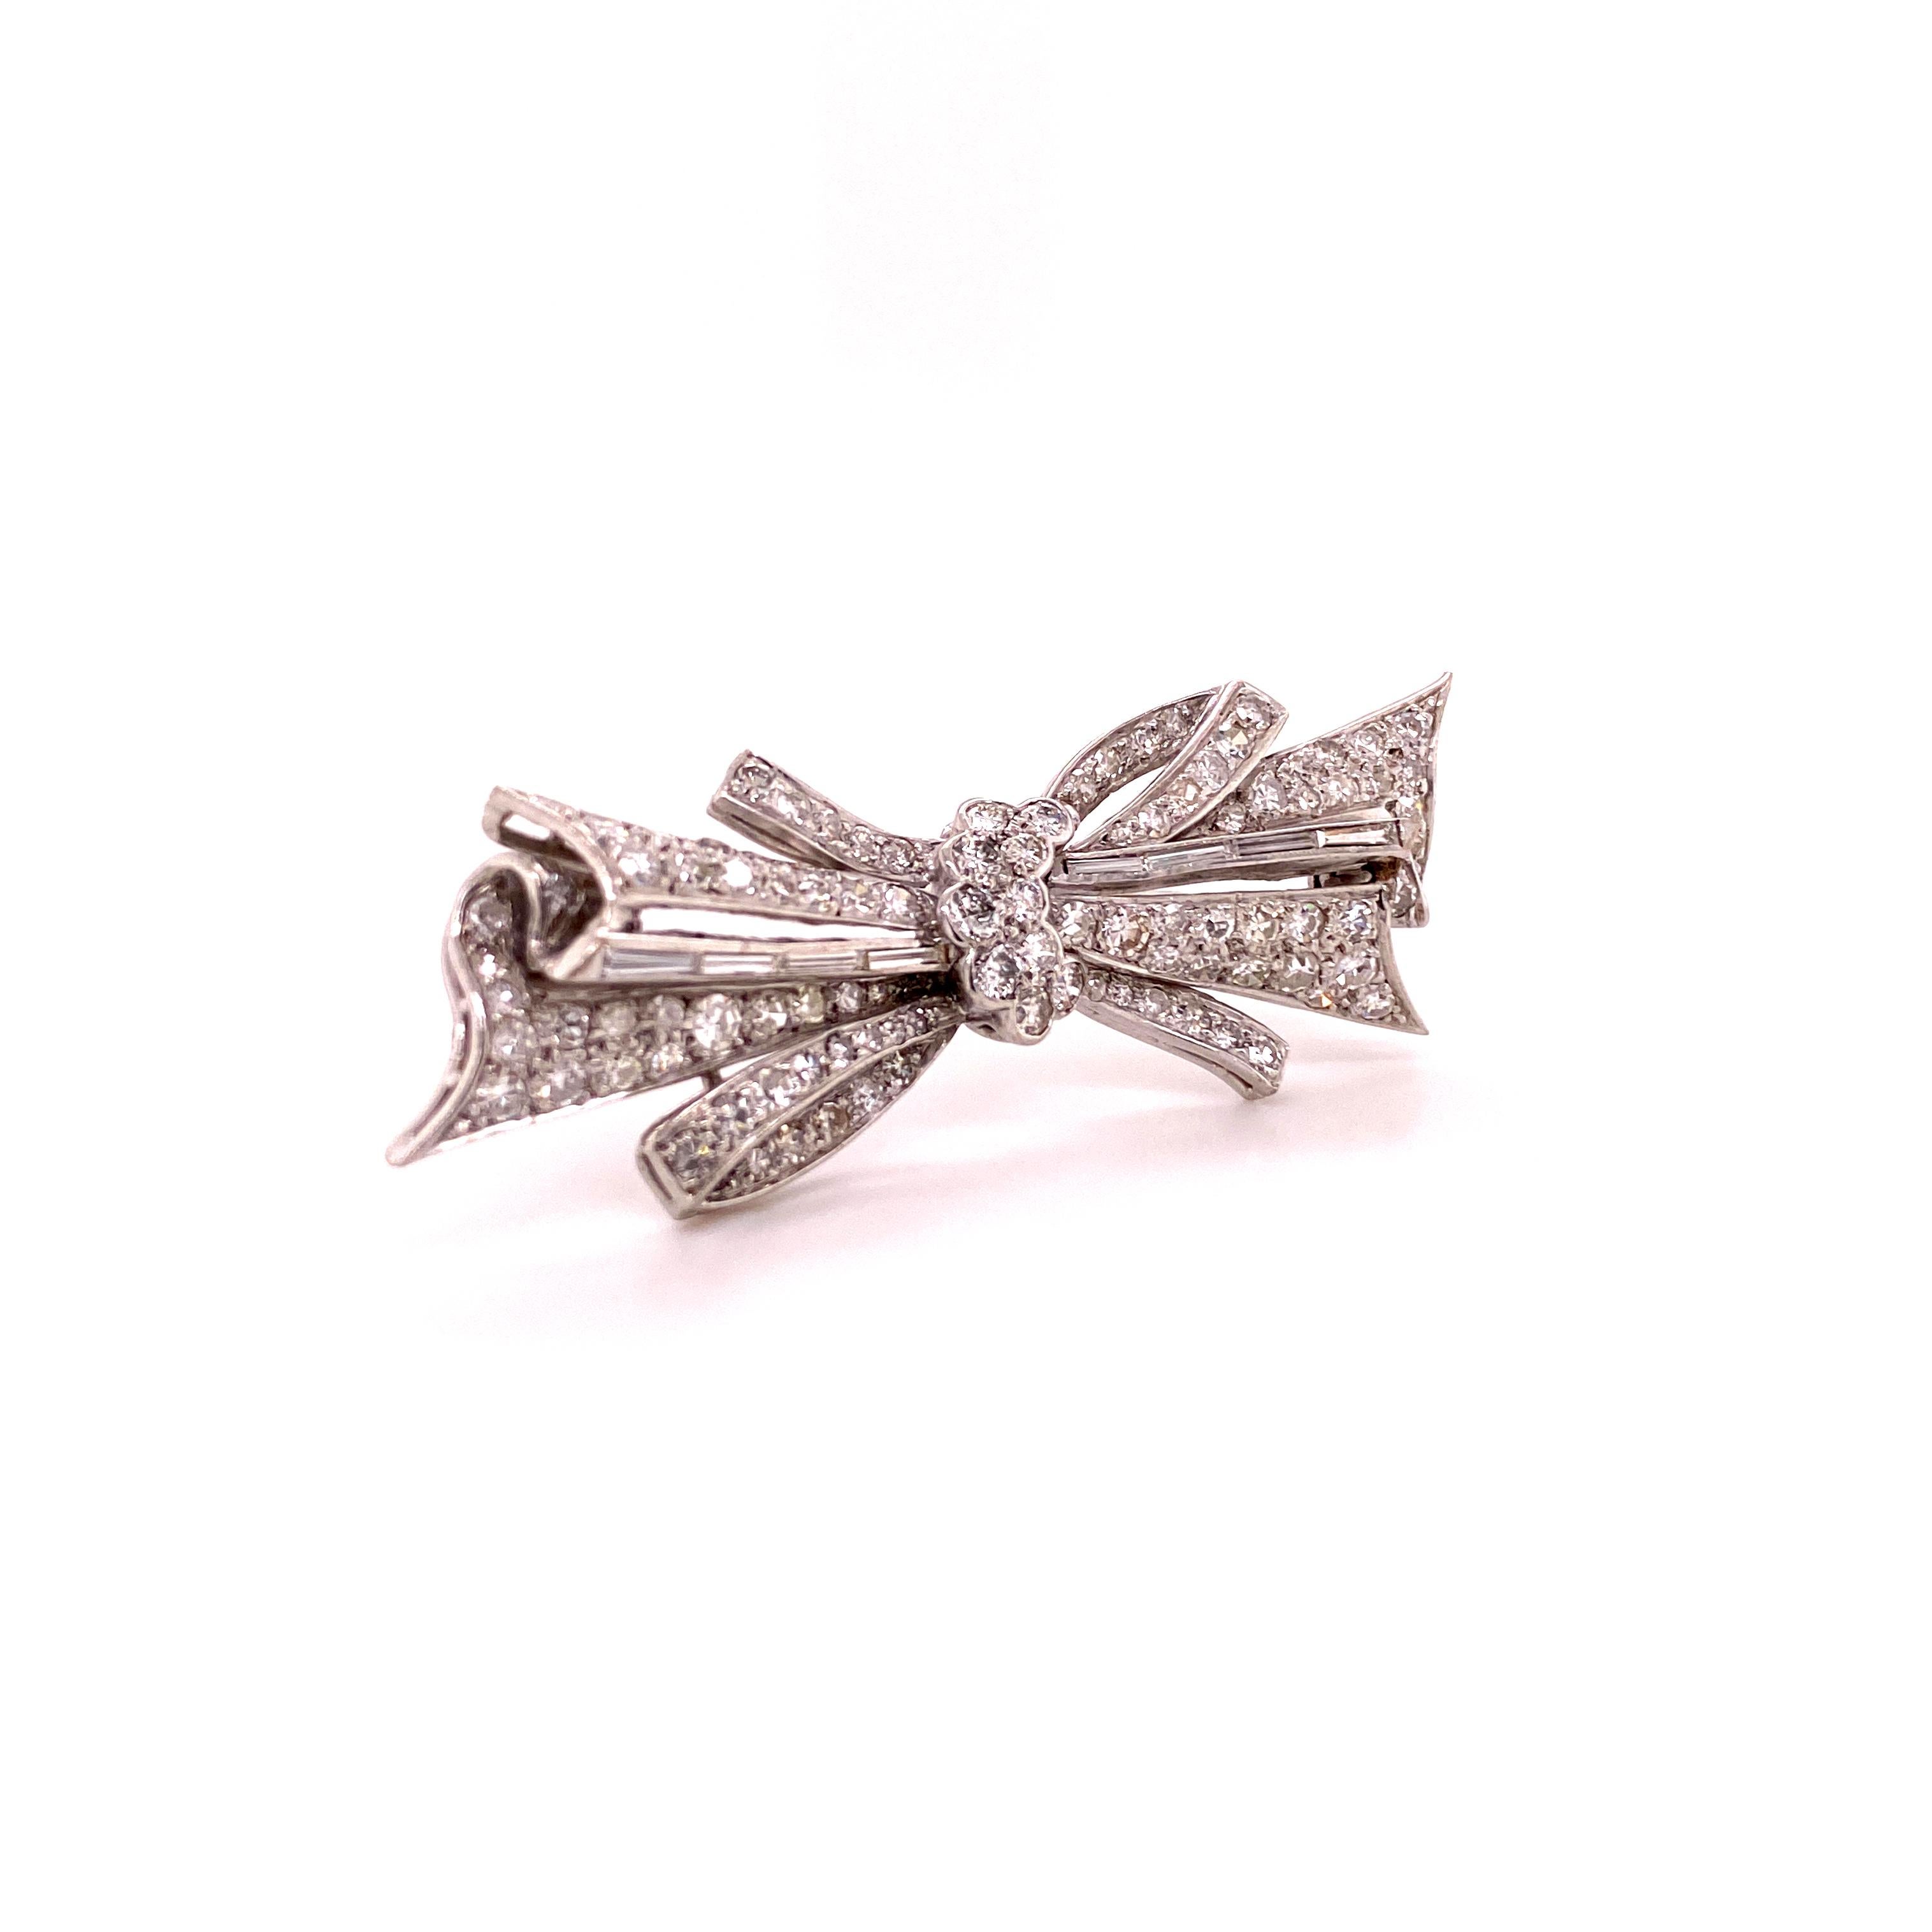 An elegant 18 karat white gold bow brooch with round brilliant, single and baguette-cut diamonds. Total weight approximately 3.30 carats of G/H-si quality.

Dimensions approx.: 5.8 x 2.1 cm / 2.28 x 0.83 inches

